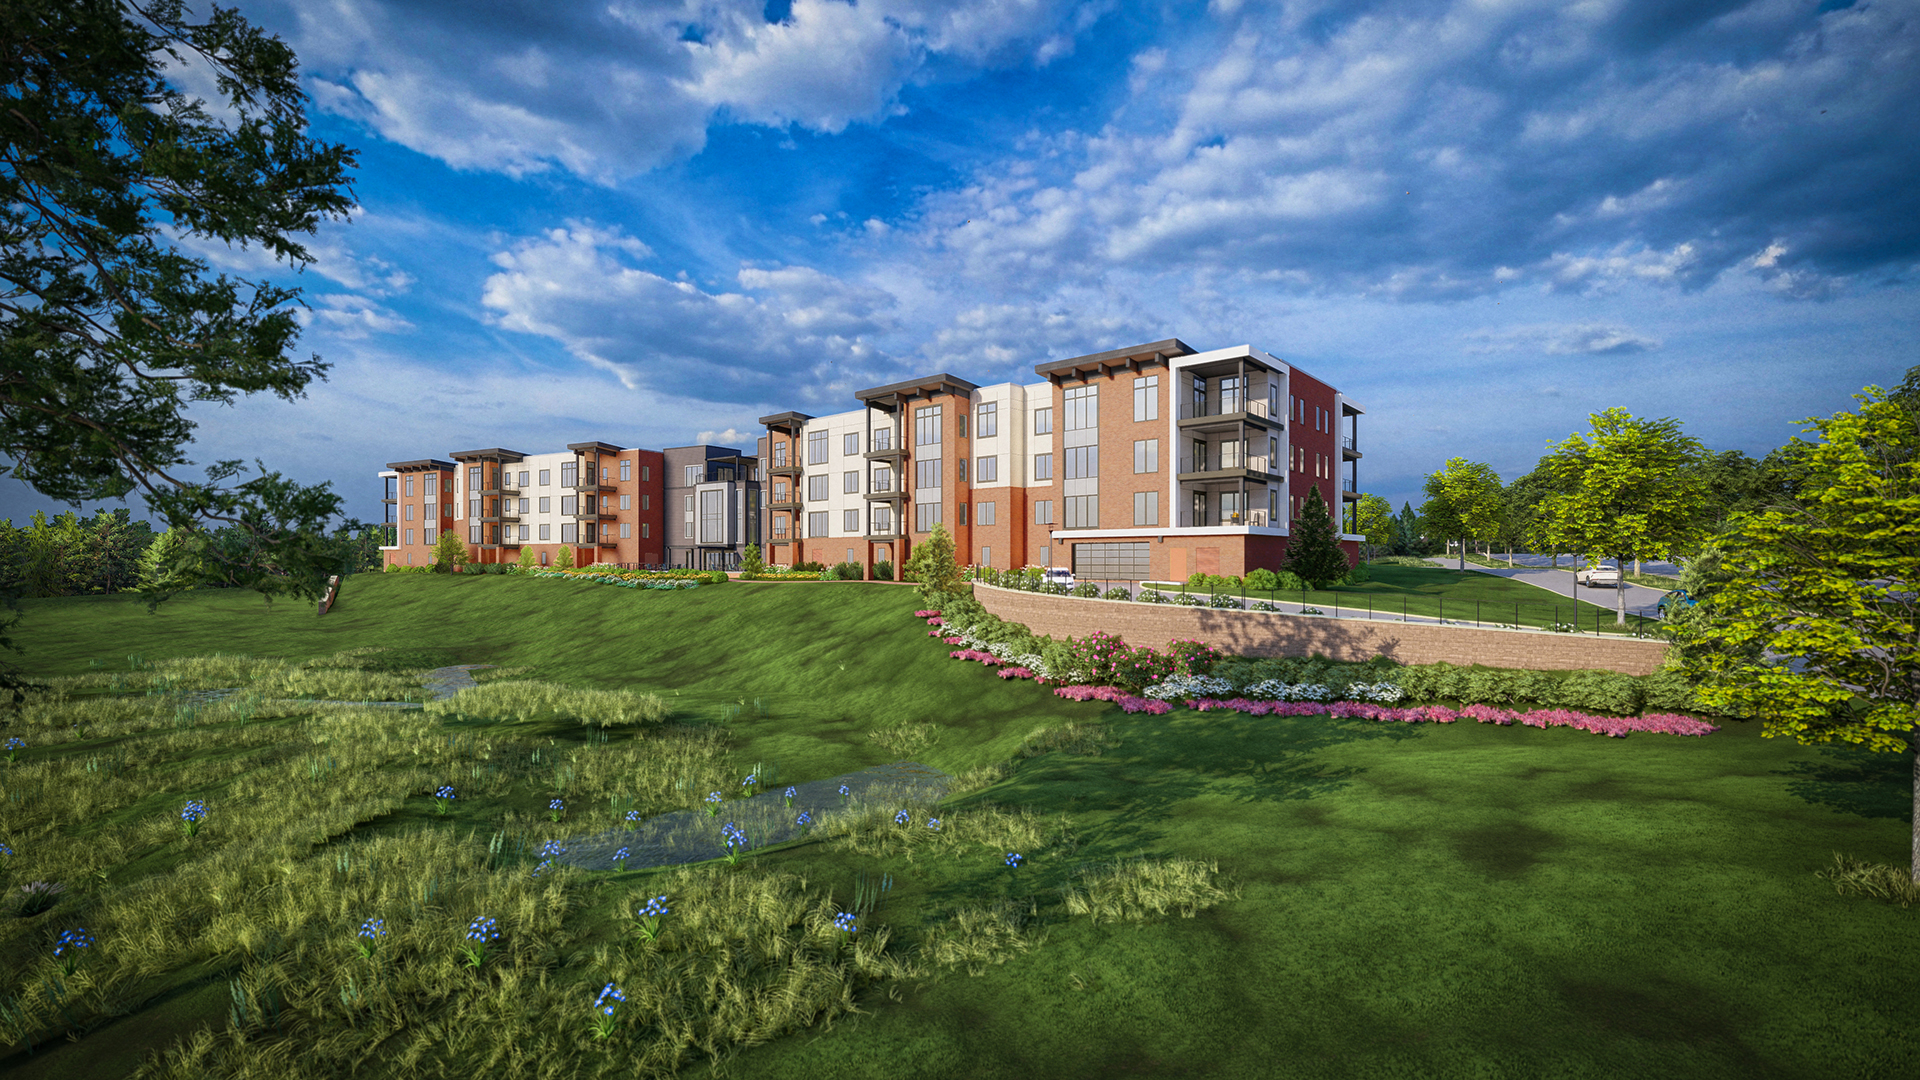 The Highlands at Wyomissing Hybrid Apartments